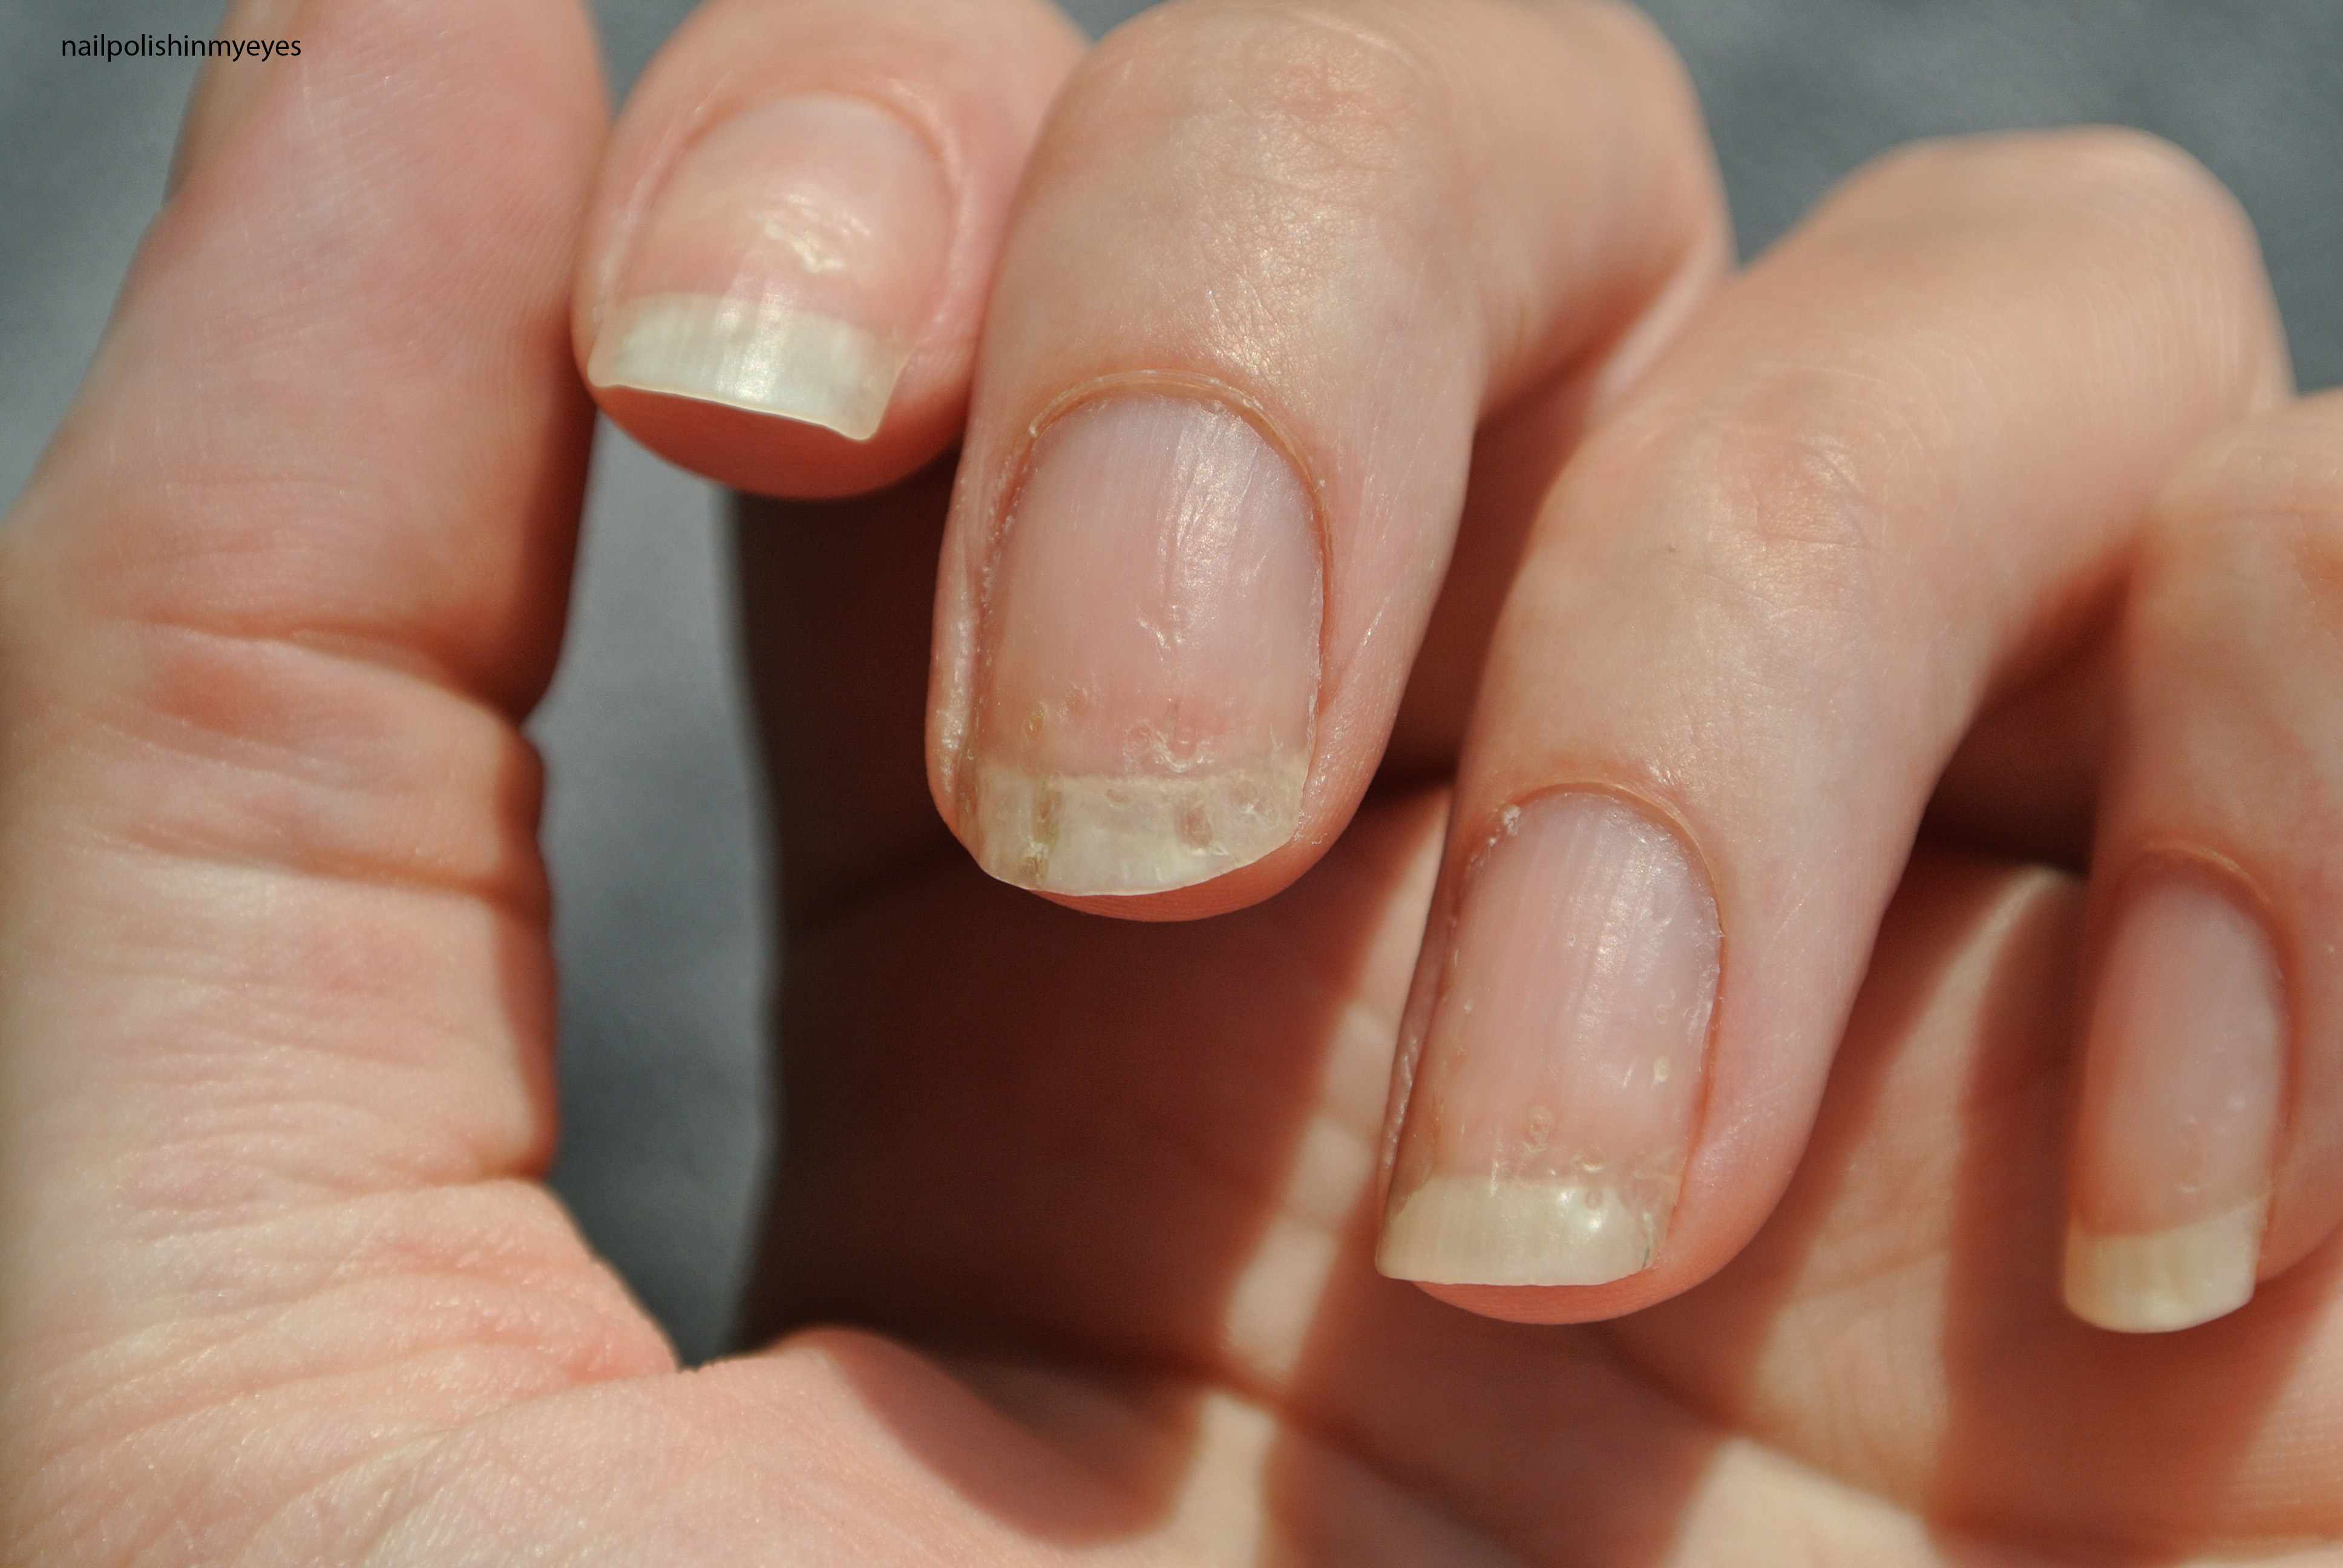 How eczema affected my nails… | Nail Polish in my Eyes